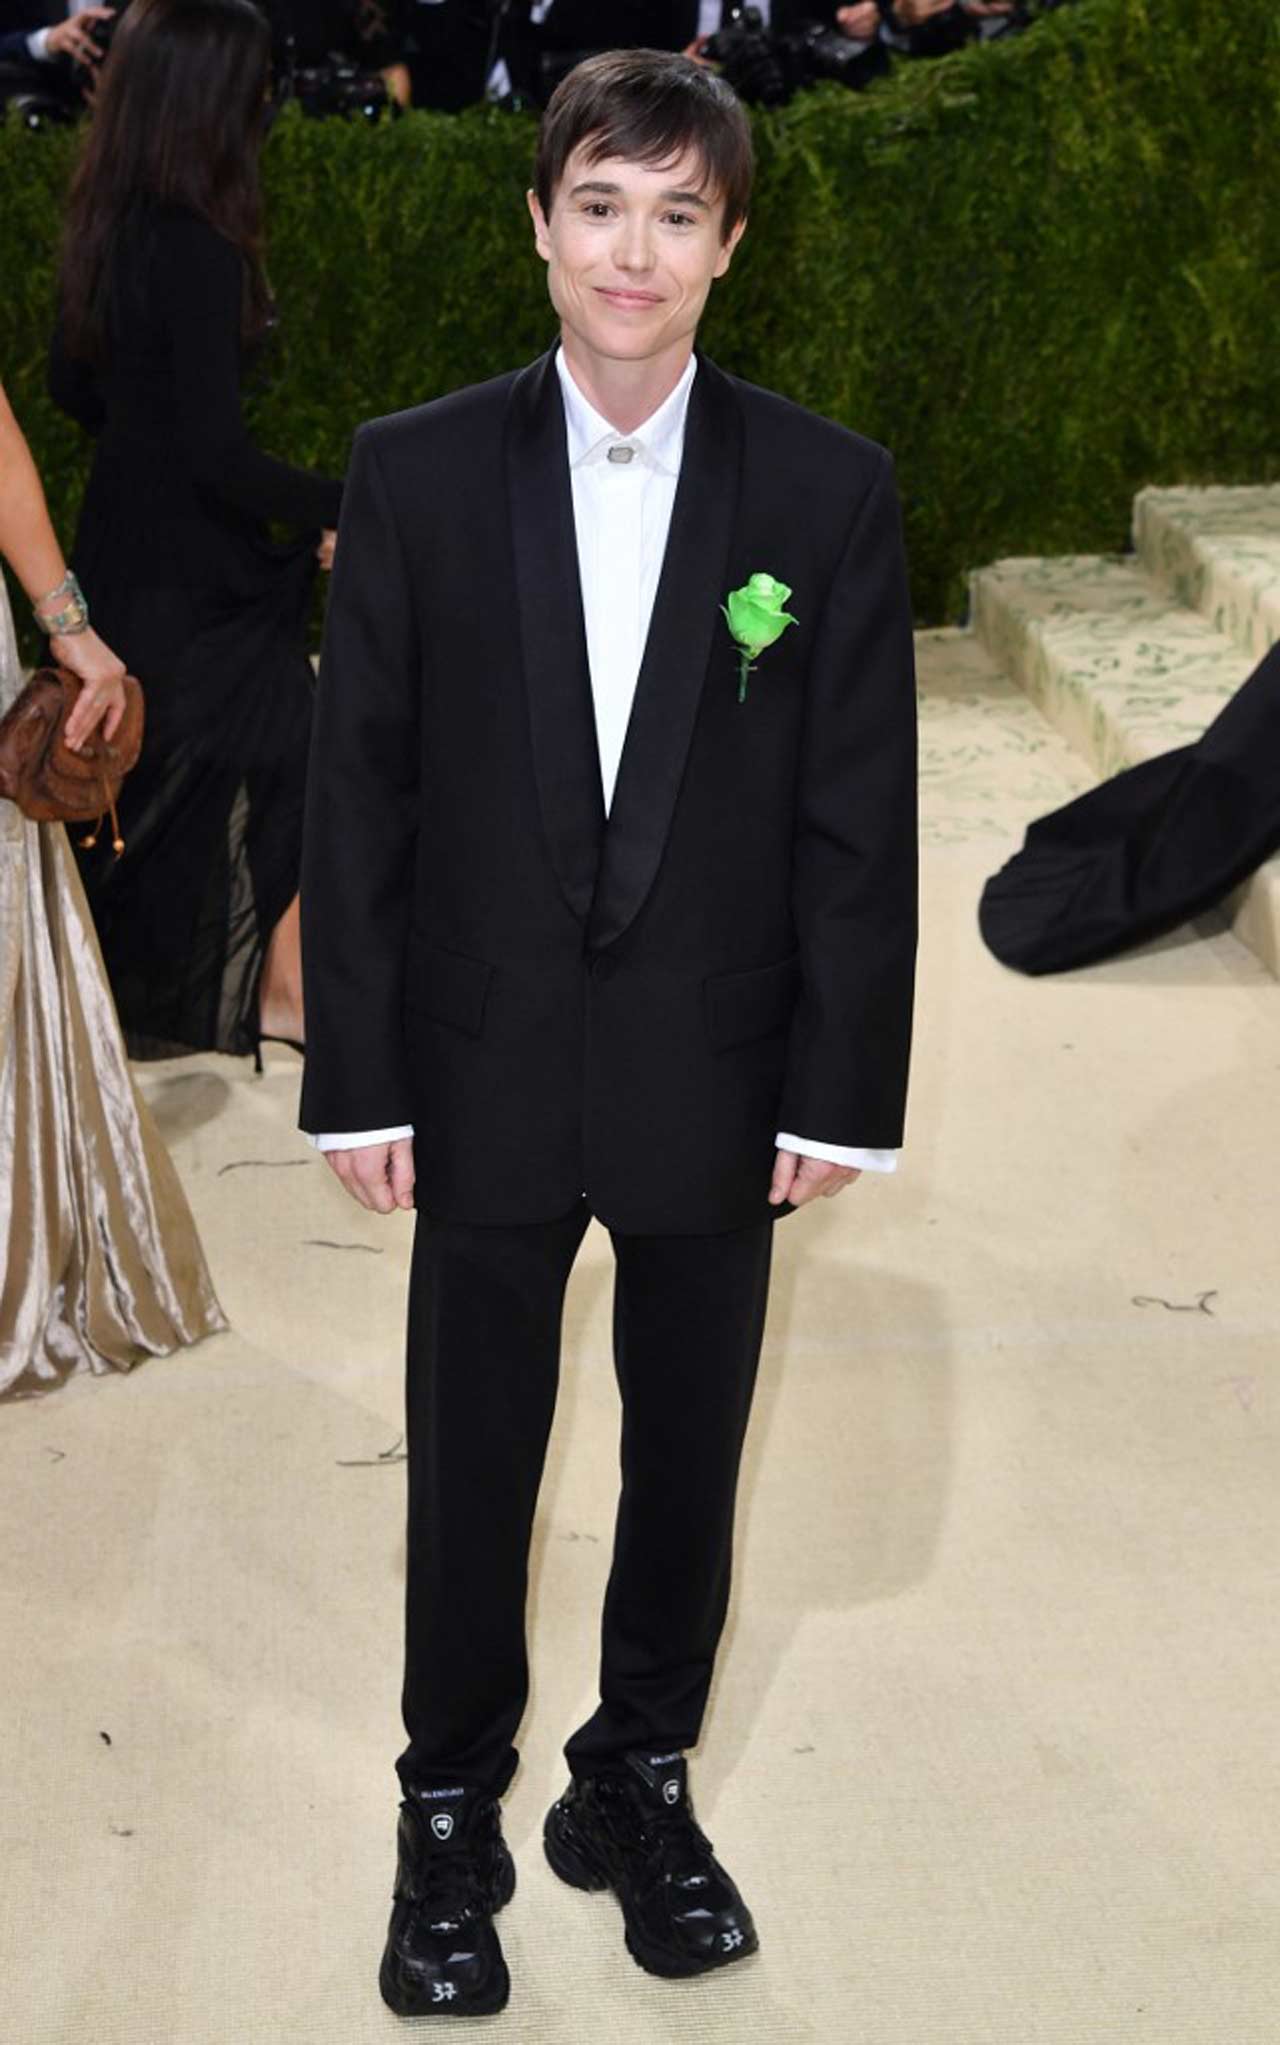 Elliot Page looked absolutely handsome in an all-black suit at the 2021 Met Gala in New York City on Monday.